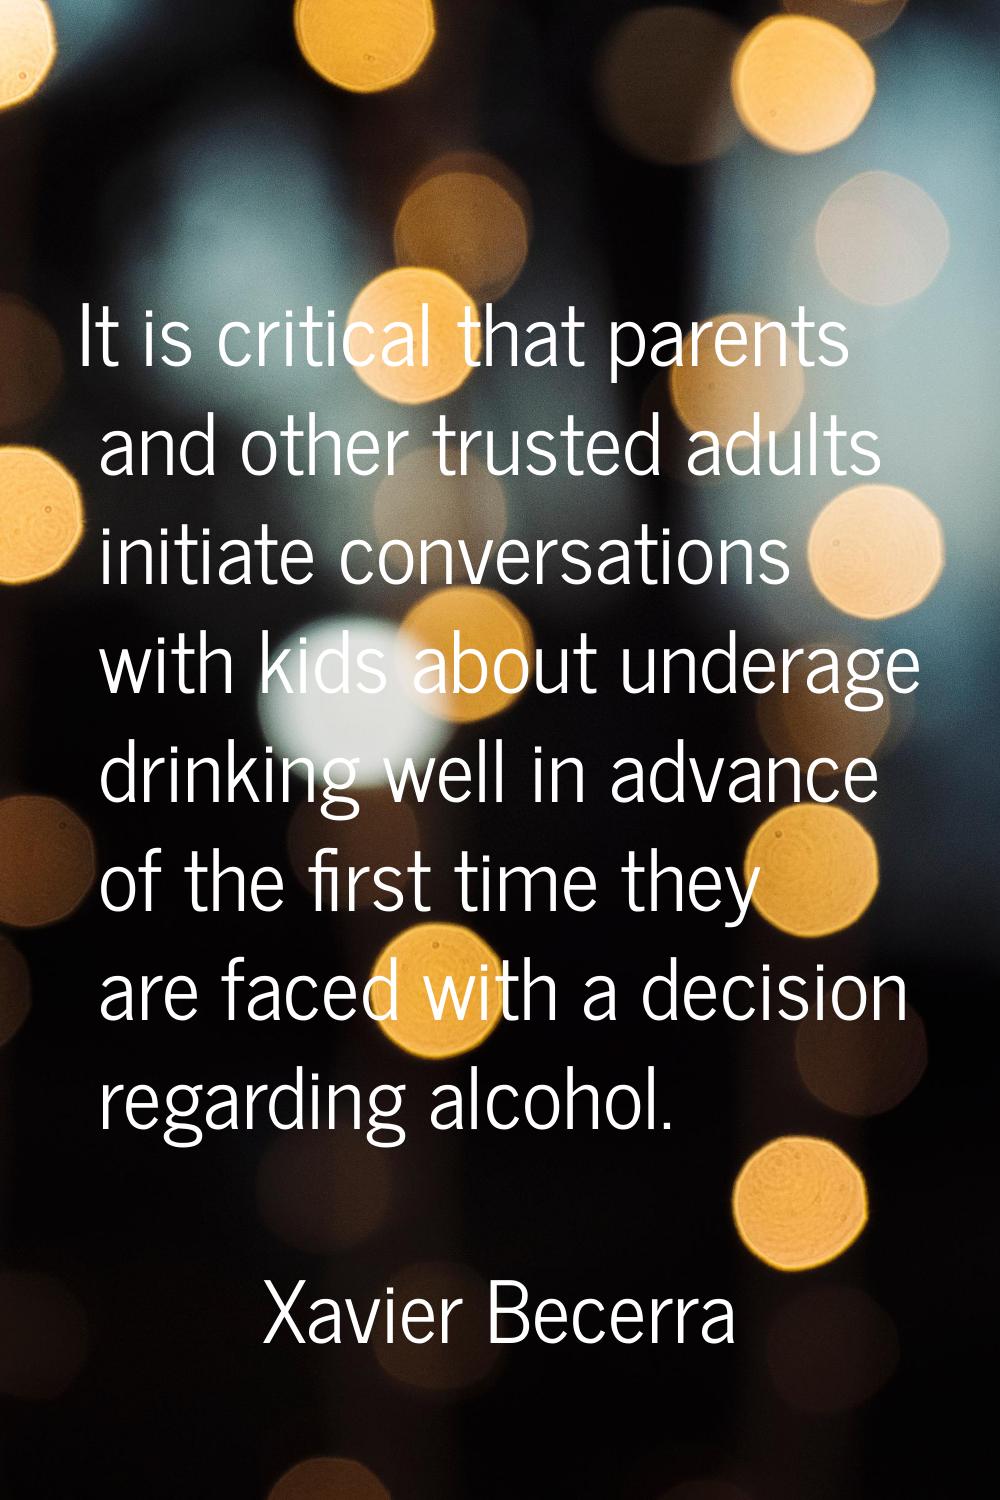 It is critical that parents and other trusted adults initiate conversations with kids about underag